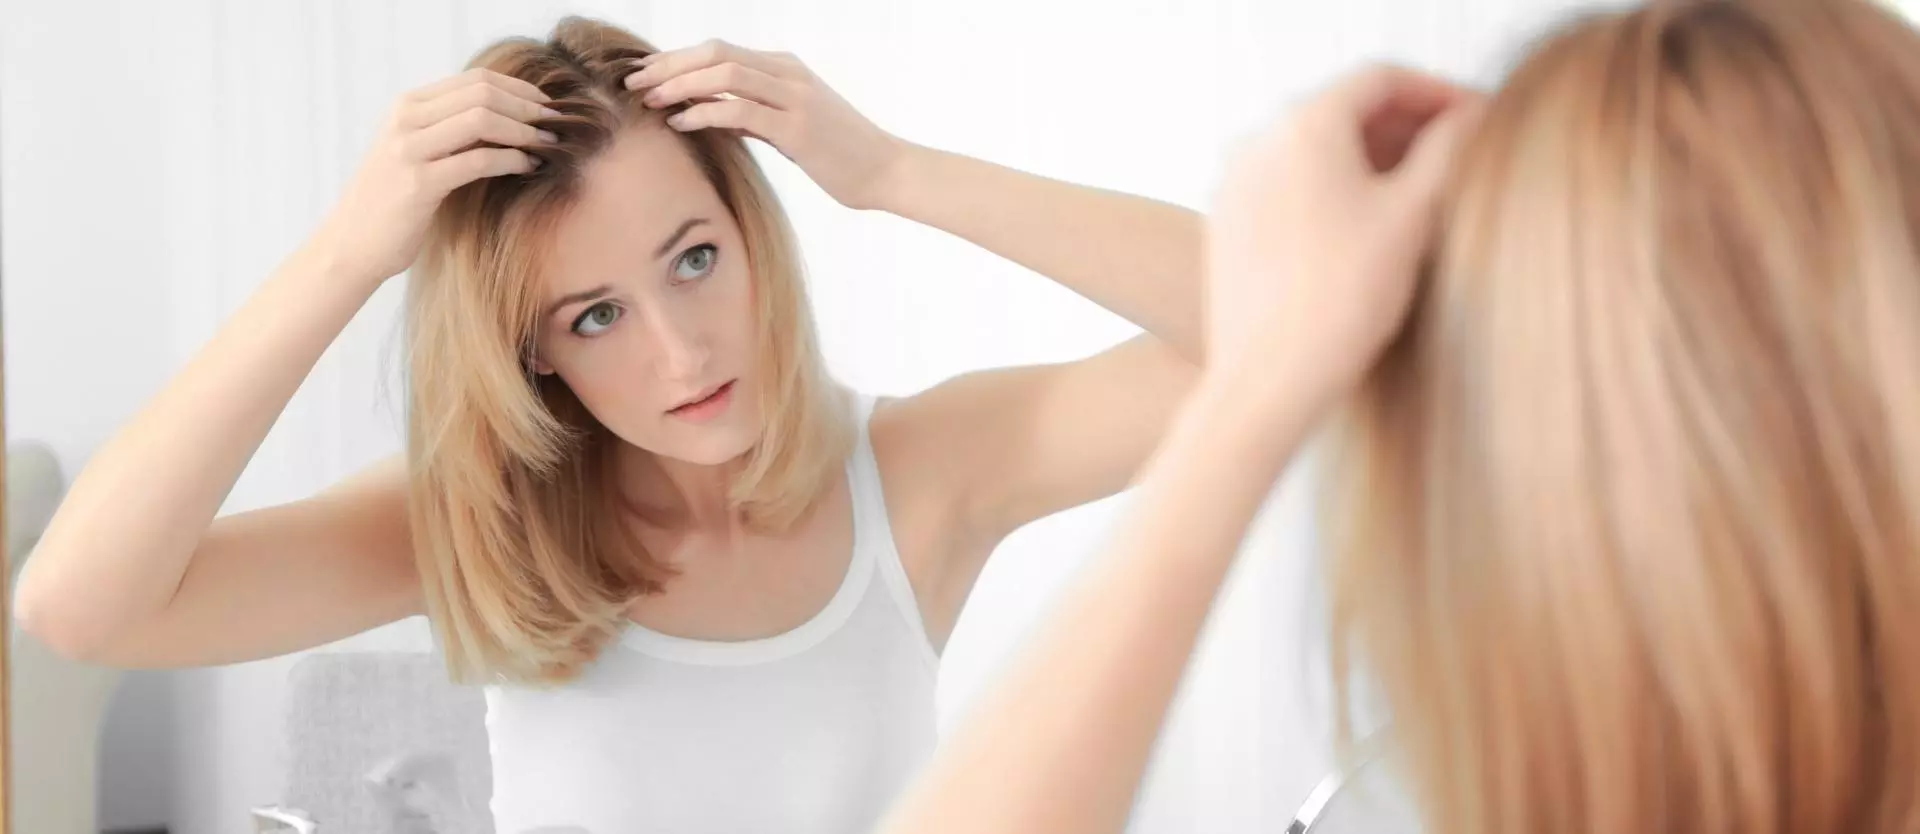 Your Introductory Guide to Understanding Trichotillomania